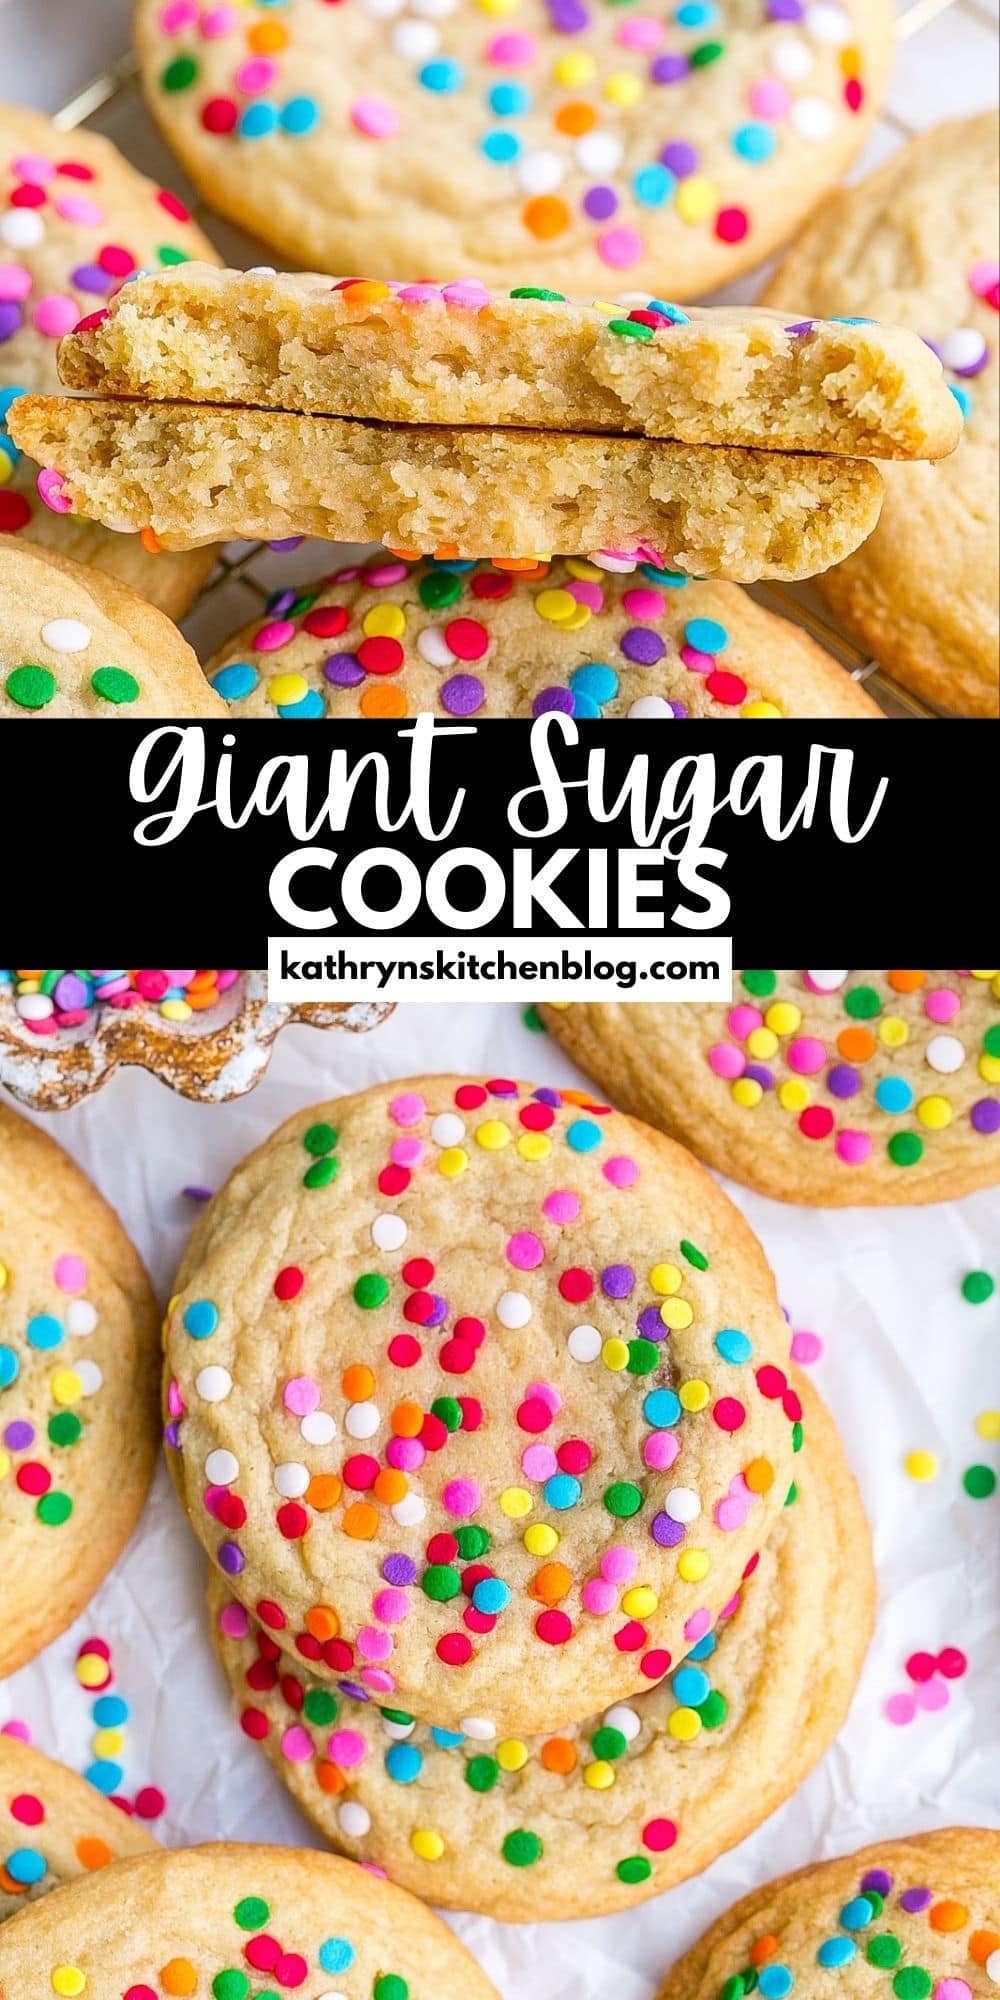 Giant Sugar Cookie Recipe (Soft Bakery-Style Cookies)